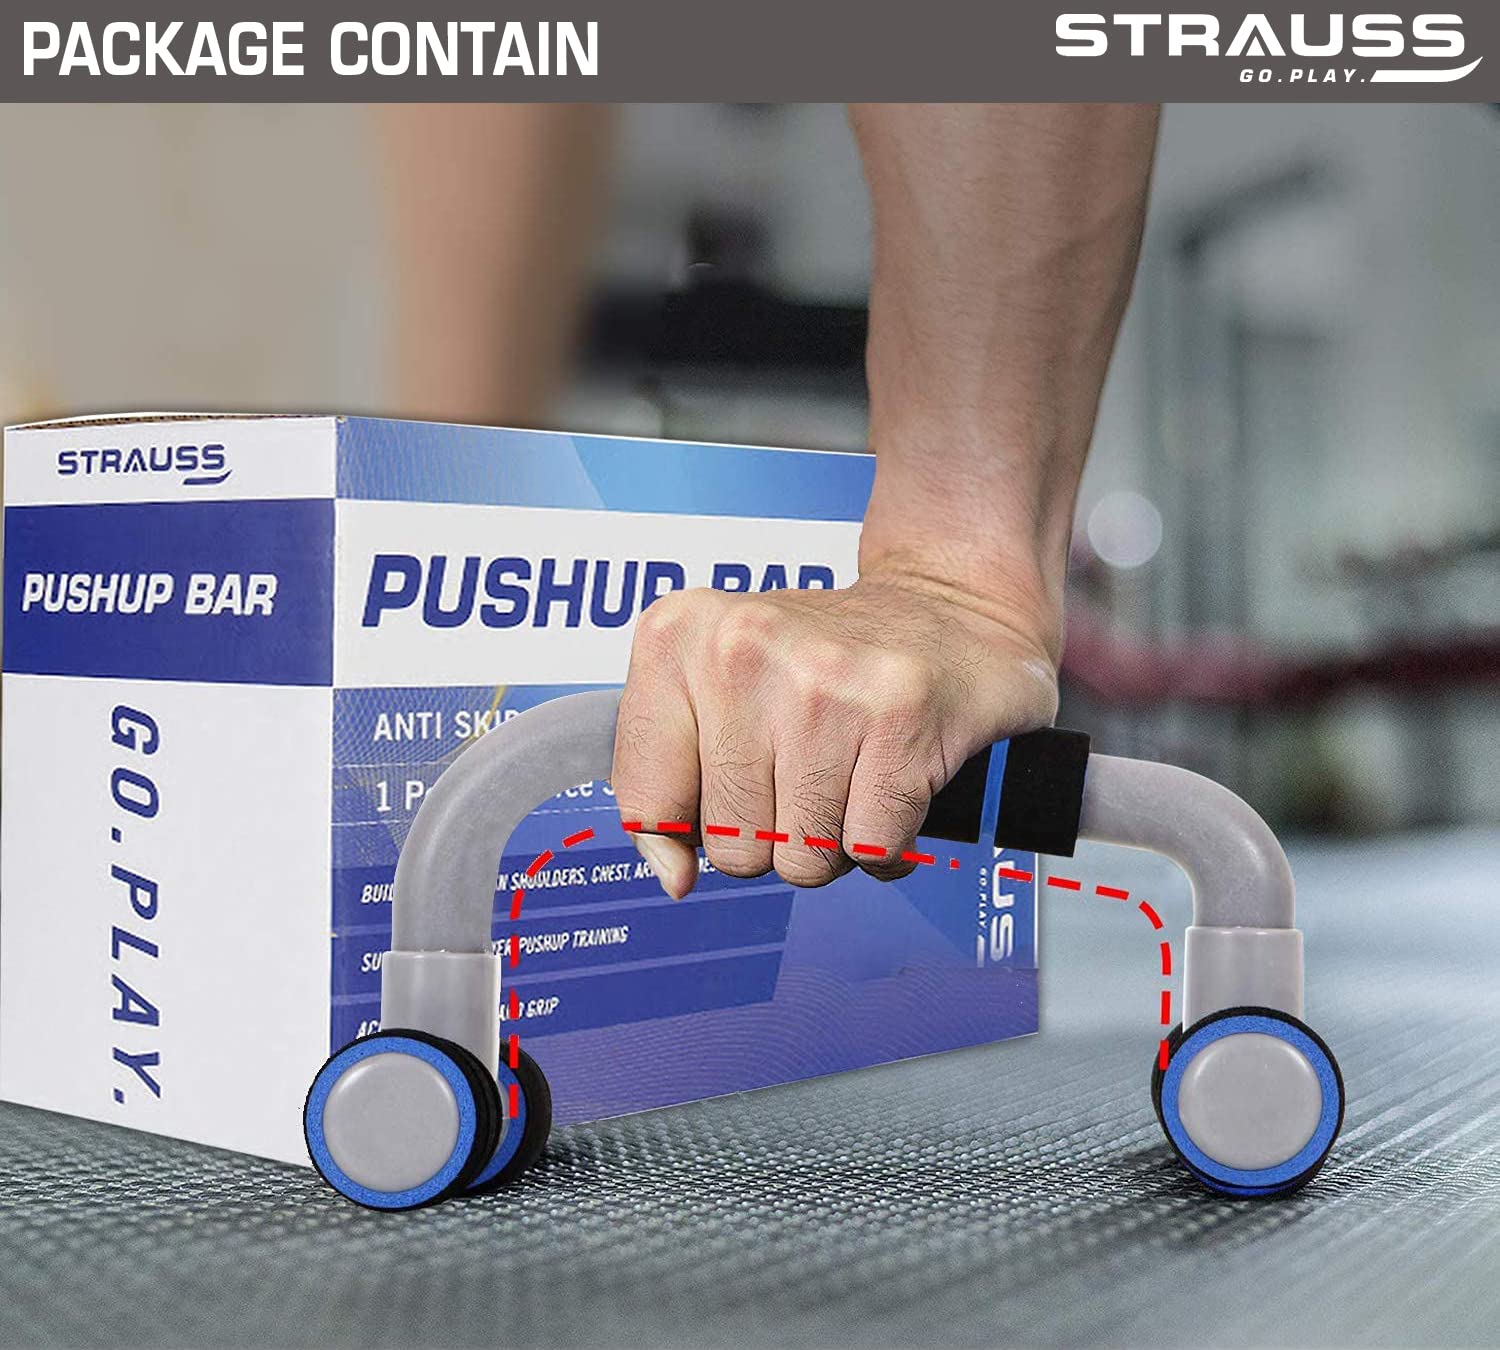 Strauss Moto Push Up Bar, Pushup Stand for Home Workout, (Blue & Grey)